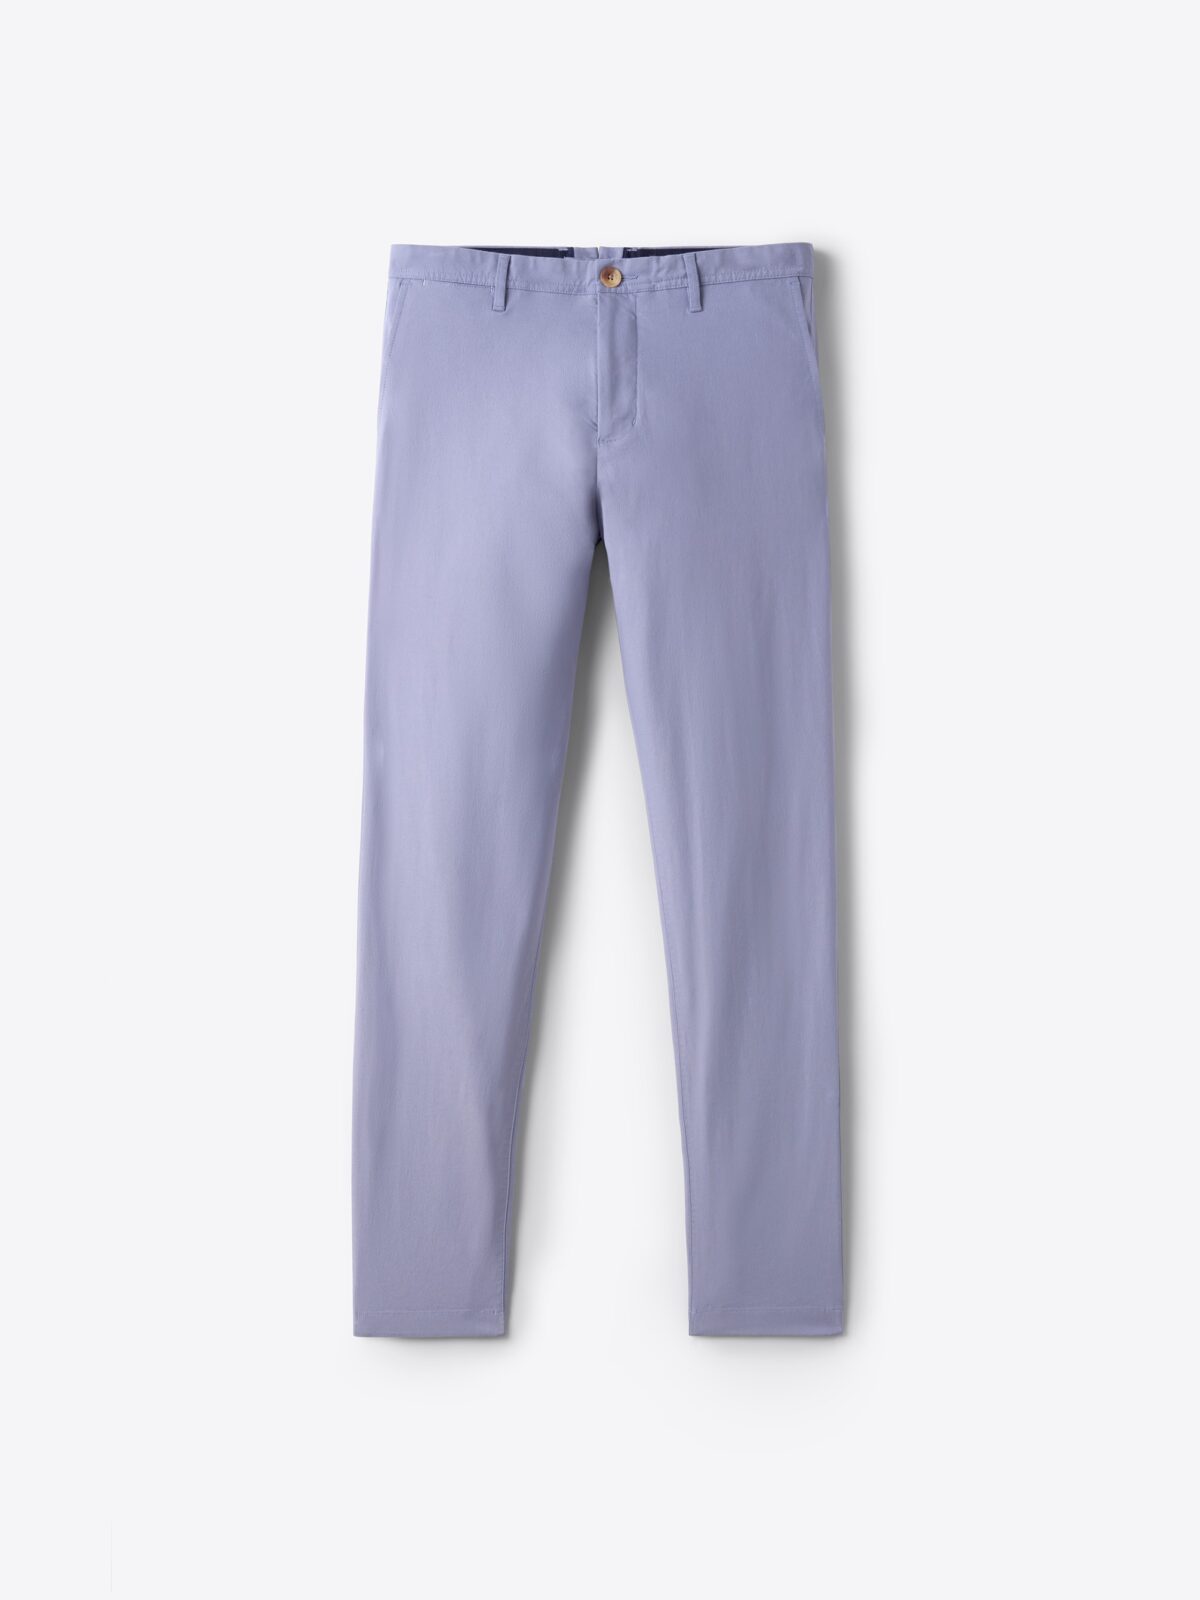 Temo Faded Blue Lightweight Stretch Cotton Chino - Custom Fit Pants